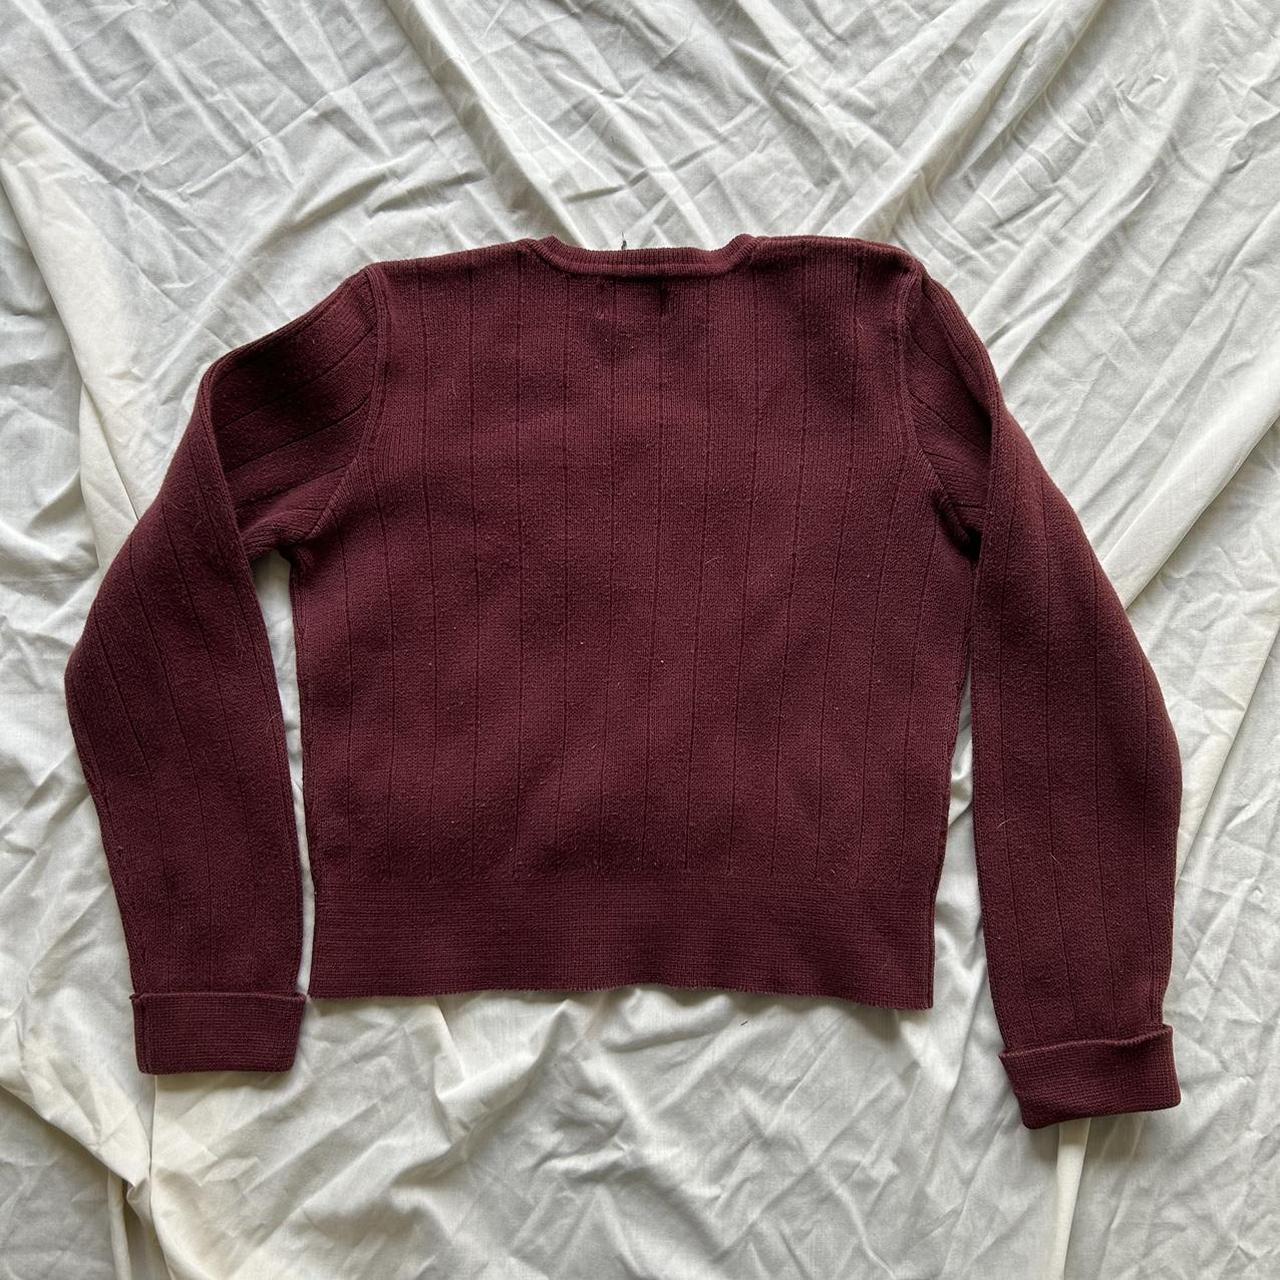 Abercrombie & Fitch Maroon Cropped Sweater - Depop